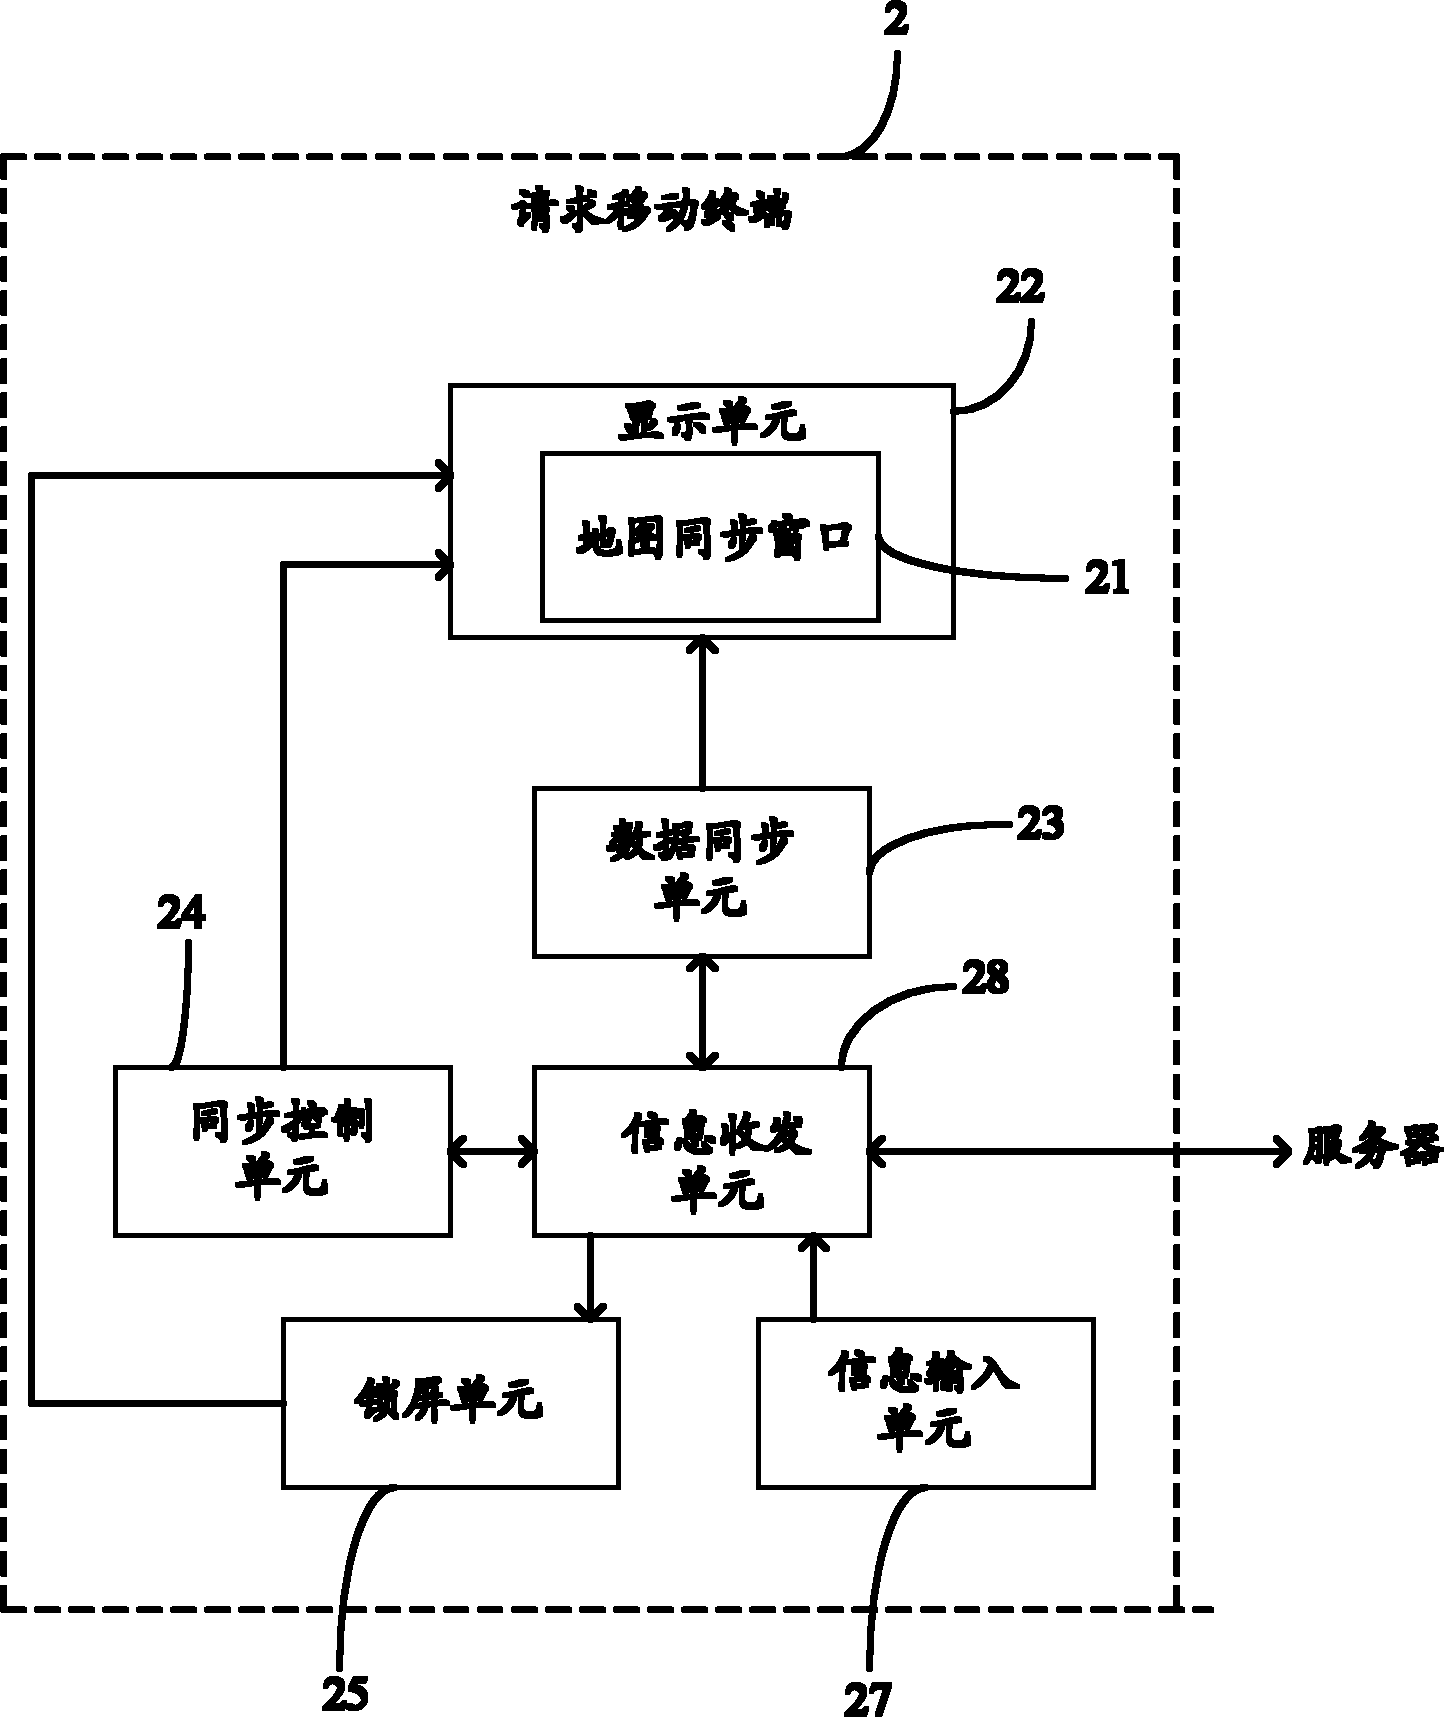 Method for assisting navigation in mobile communication and mobile terminal